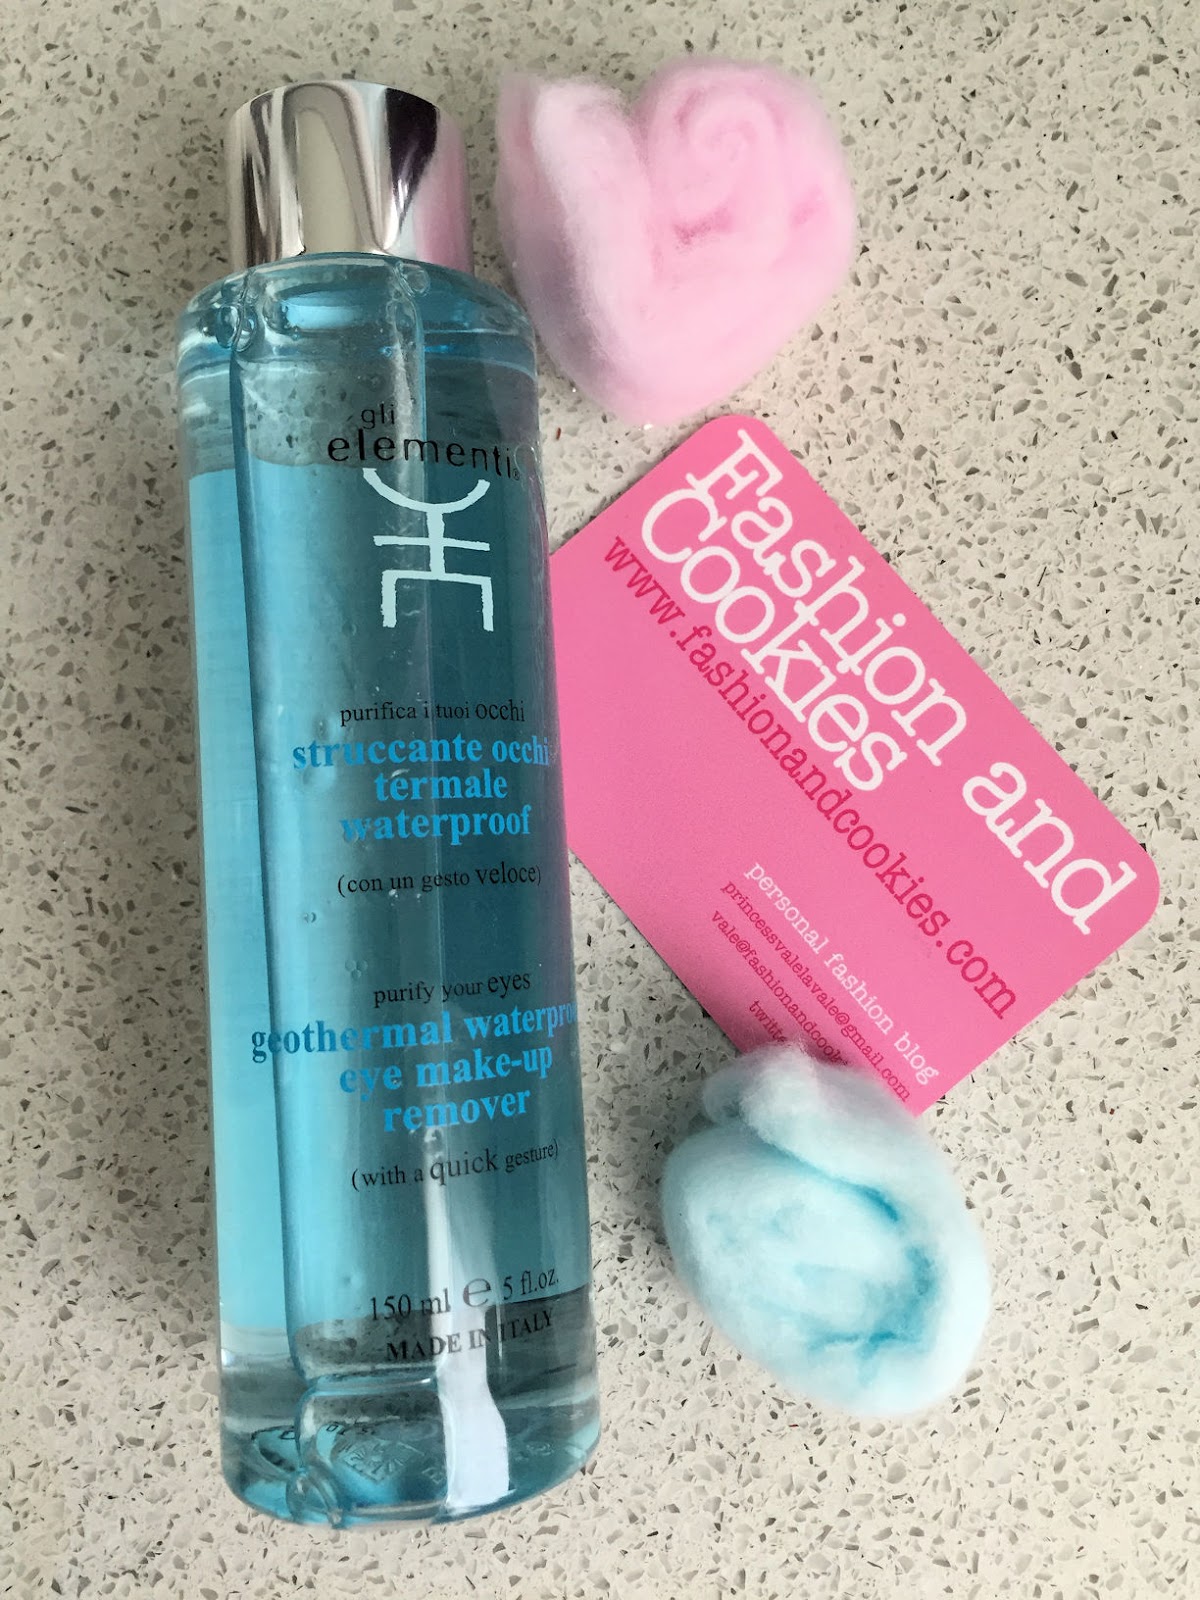 Gli Elementi biphase eye makeup remover, skincare geothermal cosmetic products on Fashion and Cookies beauty blog, beauty blogger